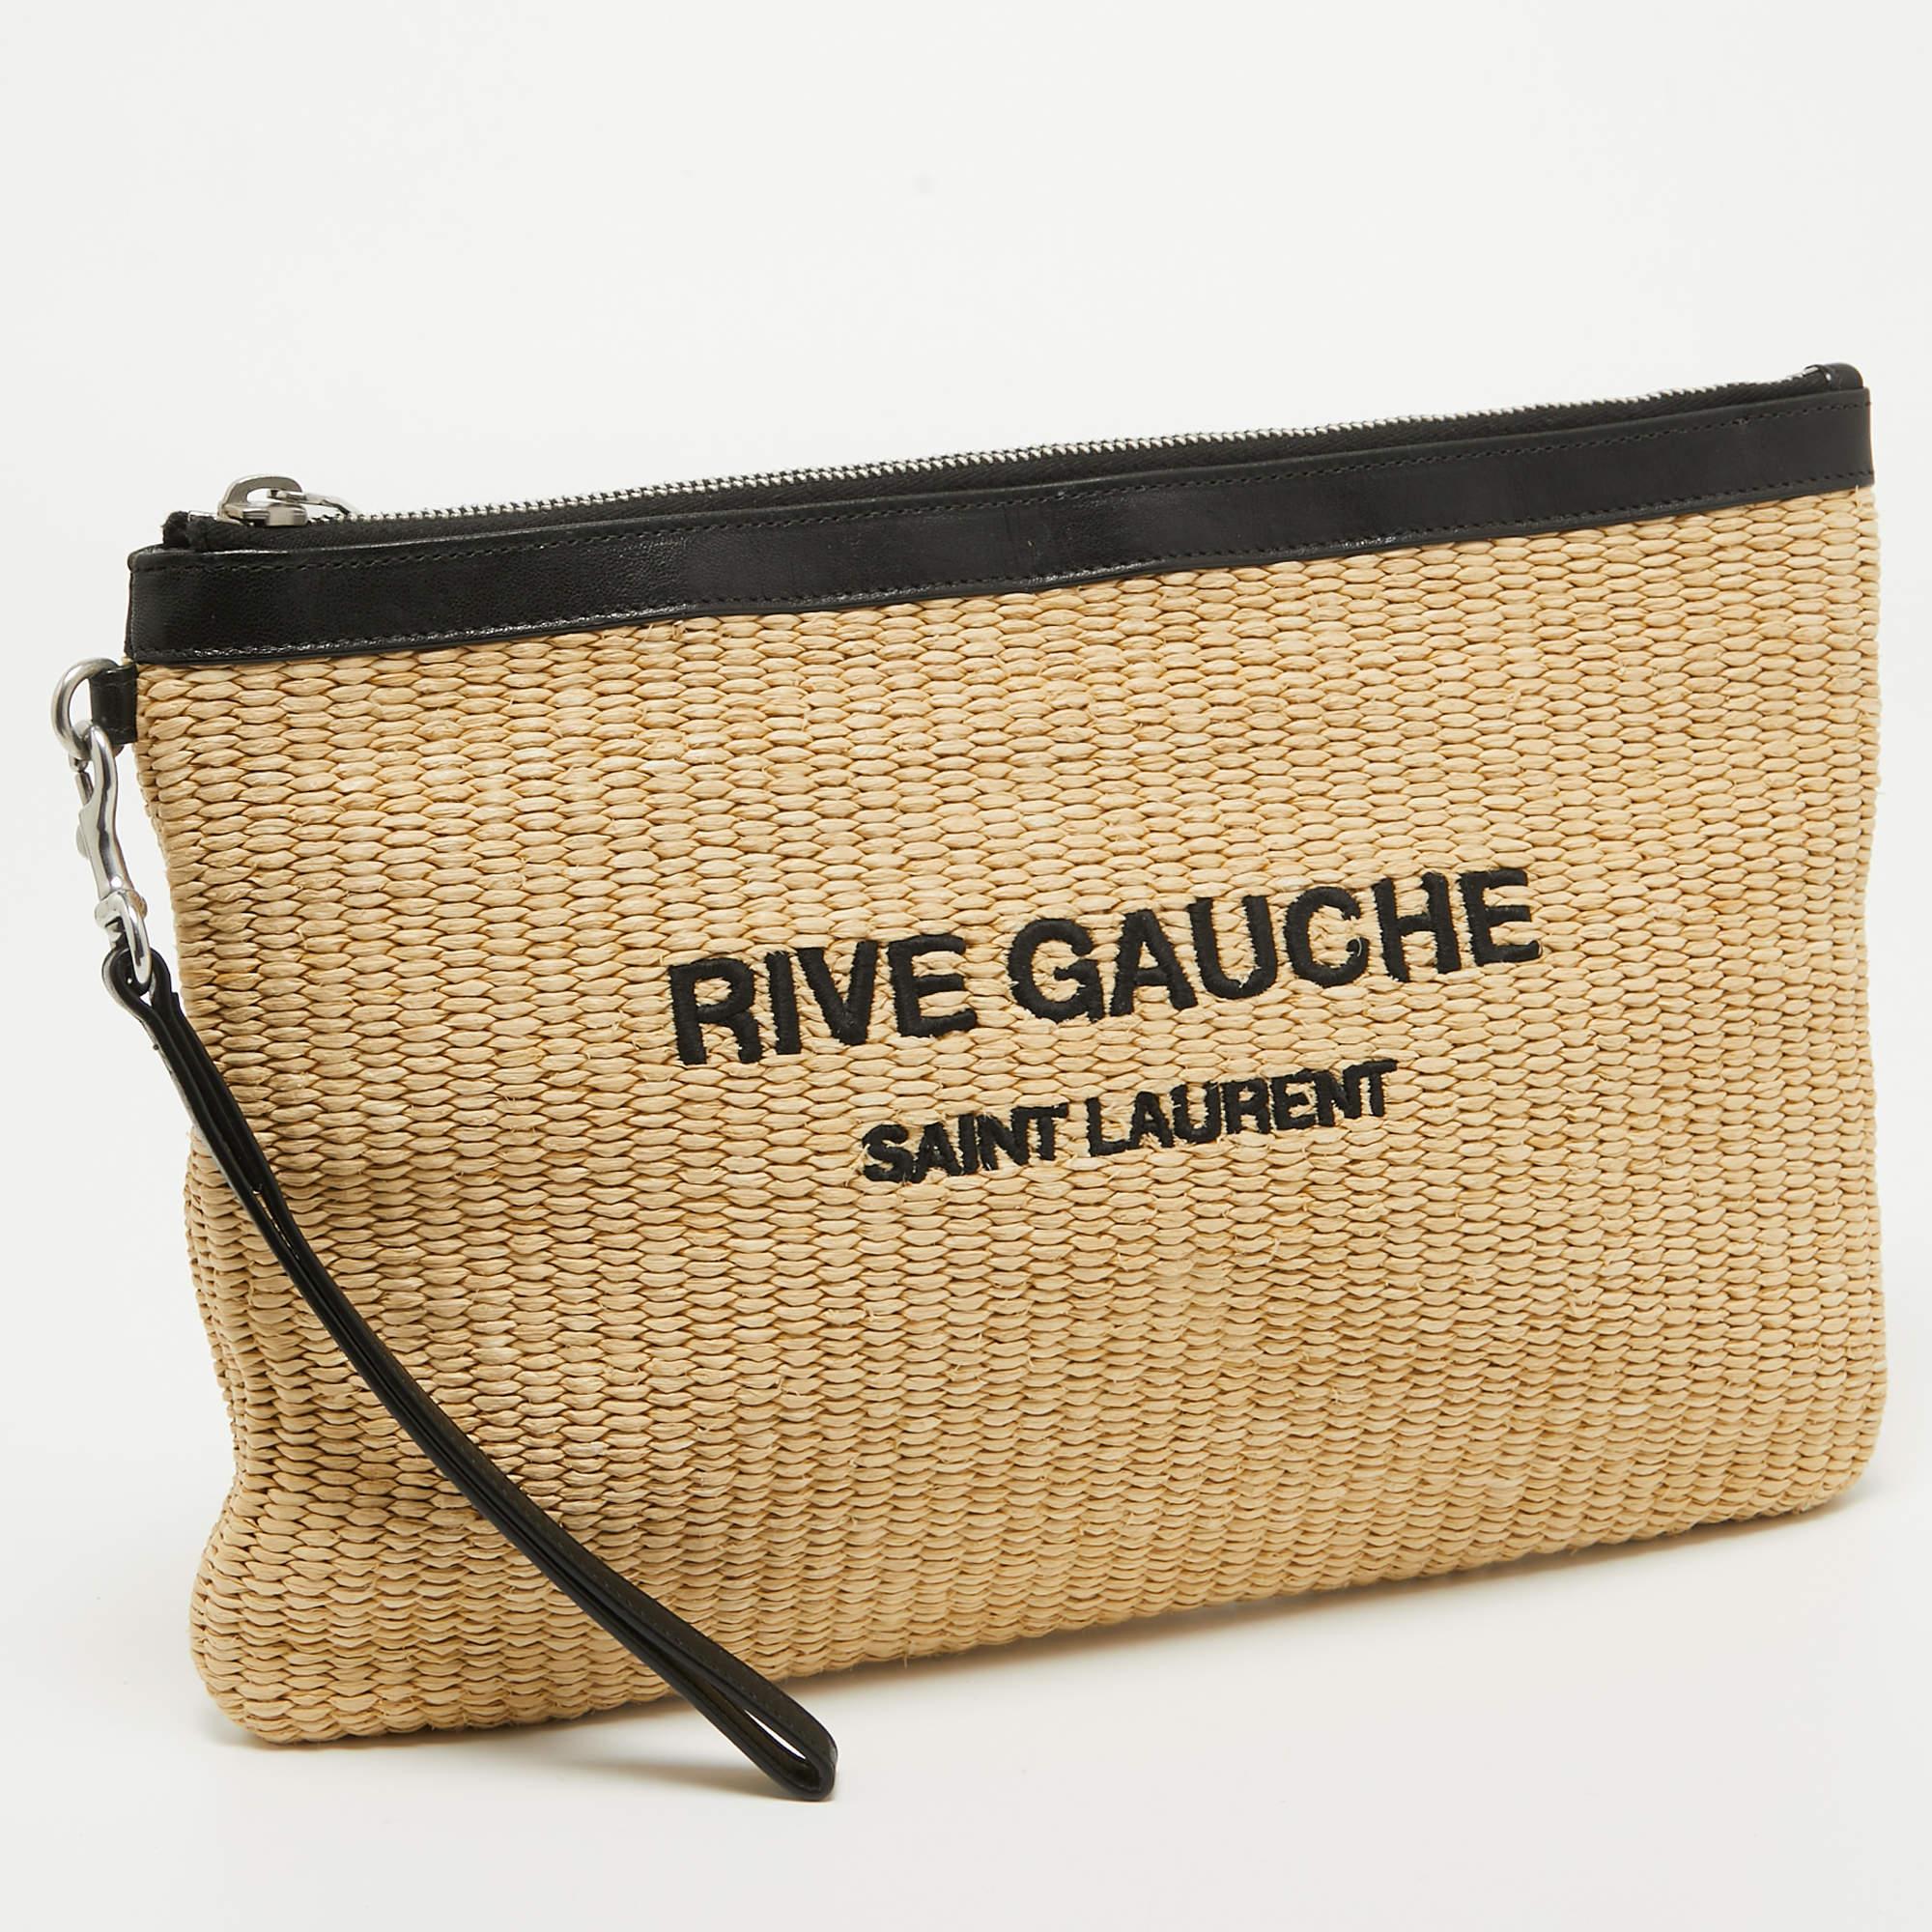 This YSL clutch for women has the kind of design that ensures high appeal, whether held in your hand or tucked under your arm. It is a meticulously crafted piece bound to last a long time.

